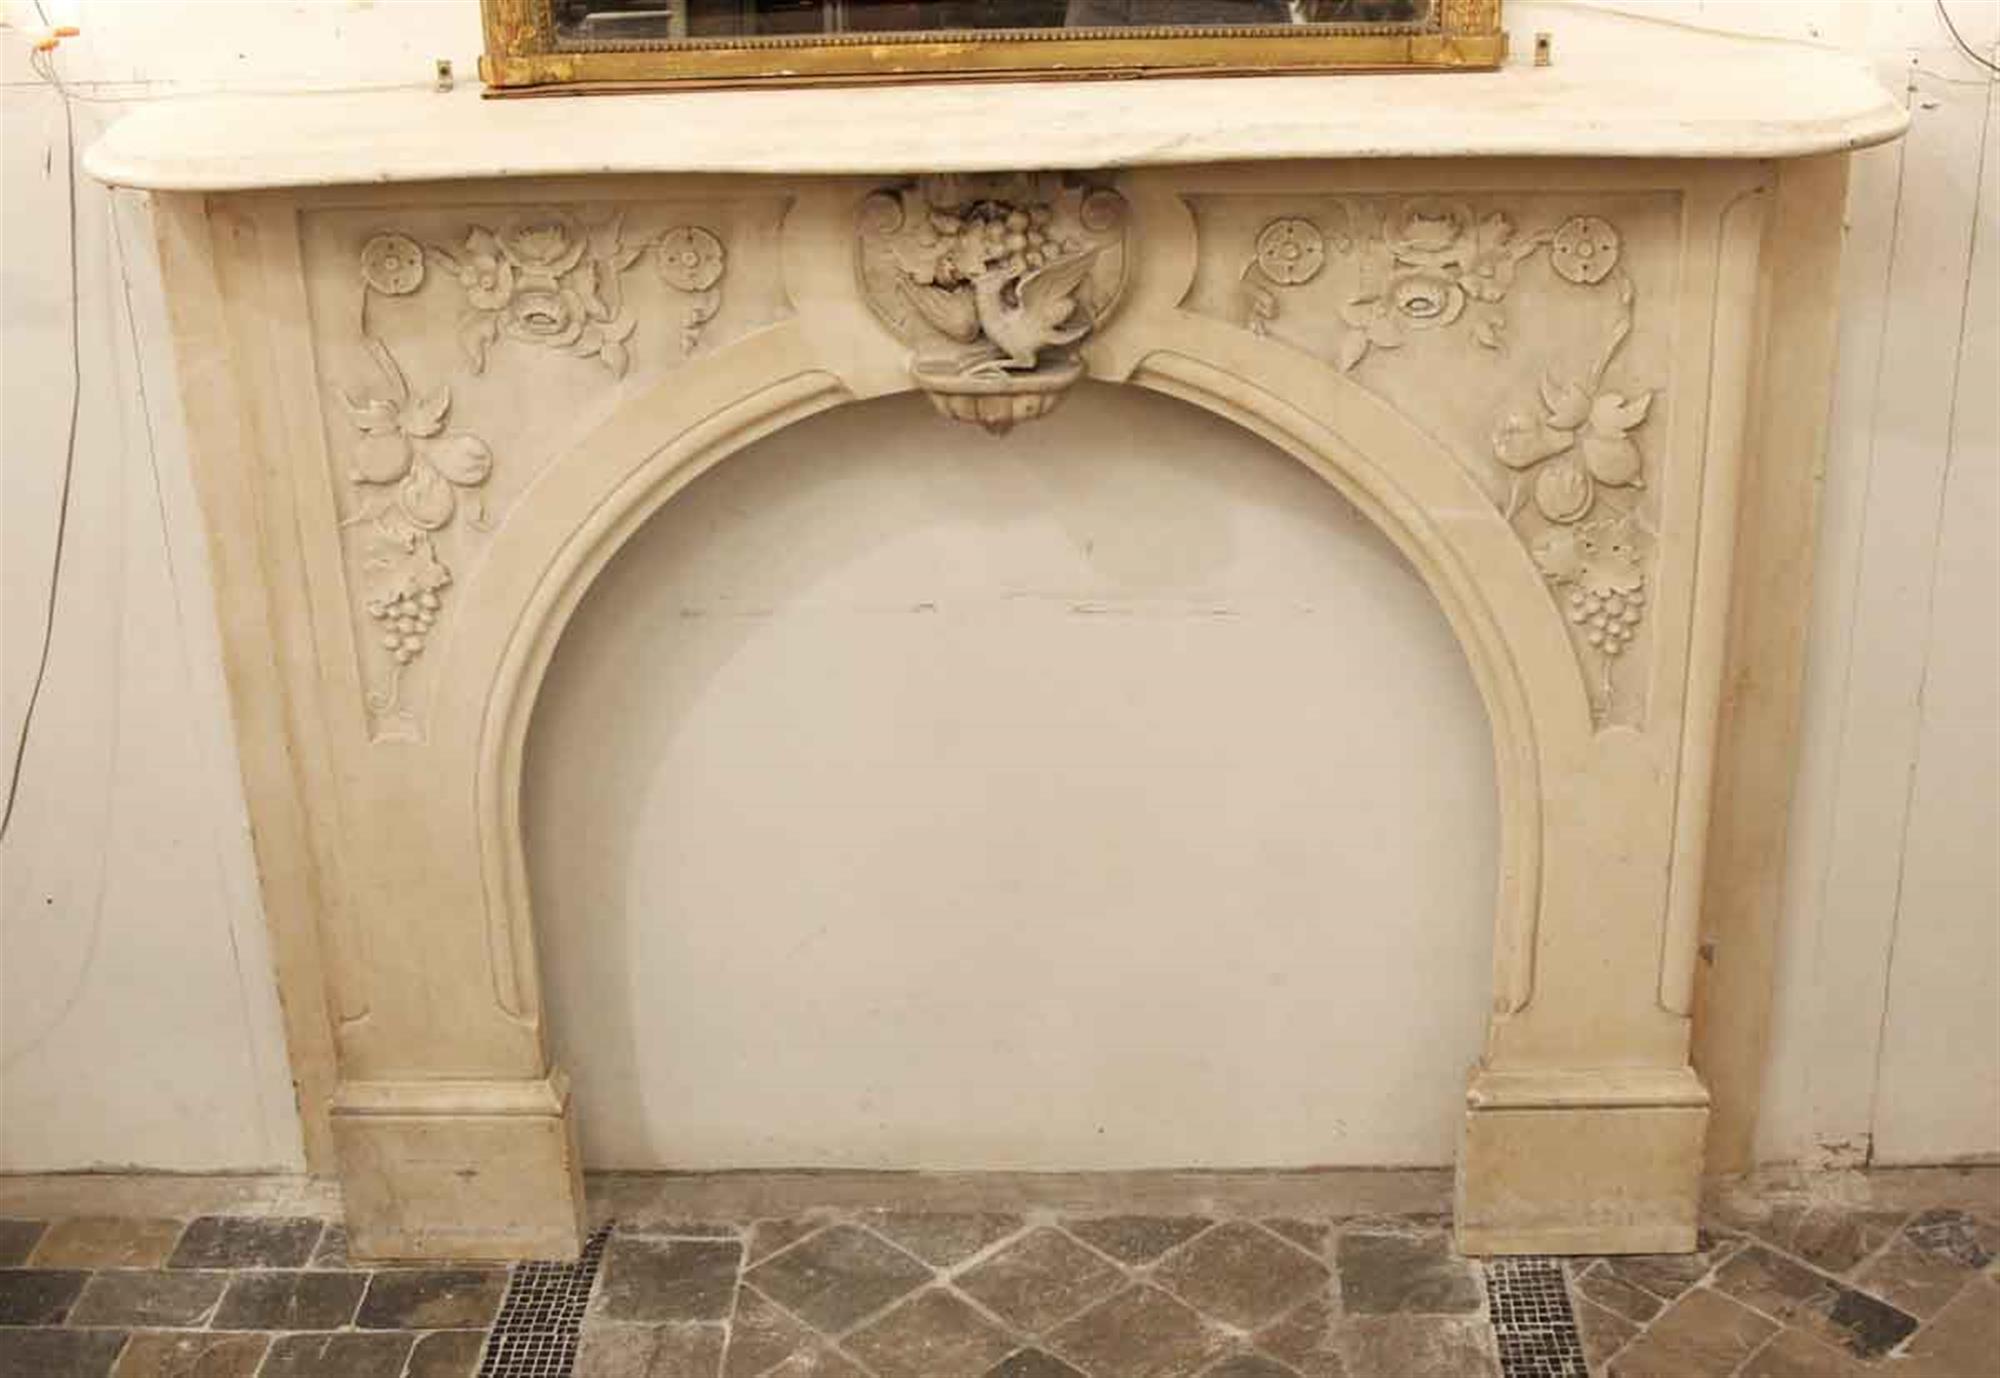 1900s tan Victorian hand carved marble mantel with grapevine, bird and floral details with an arched opening. This can be seen at our 333 West 52nd St location in the Theater District West of Manhattan.